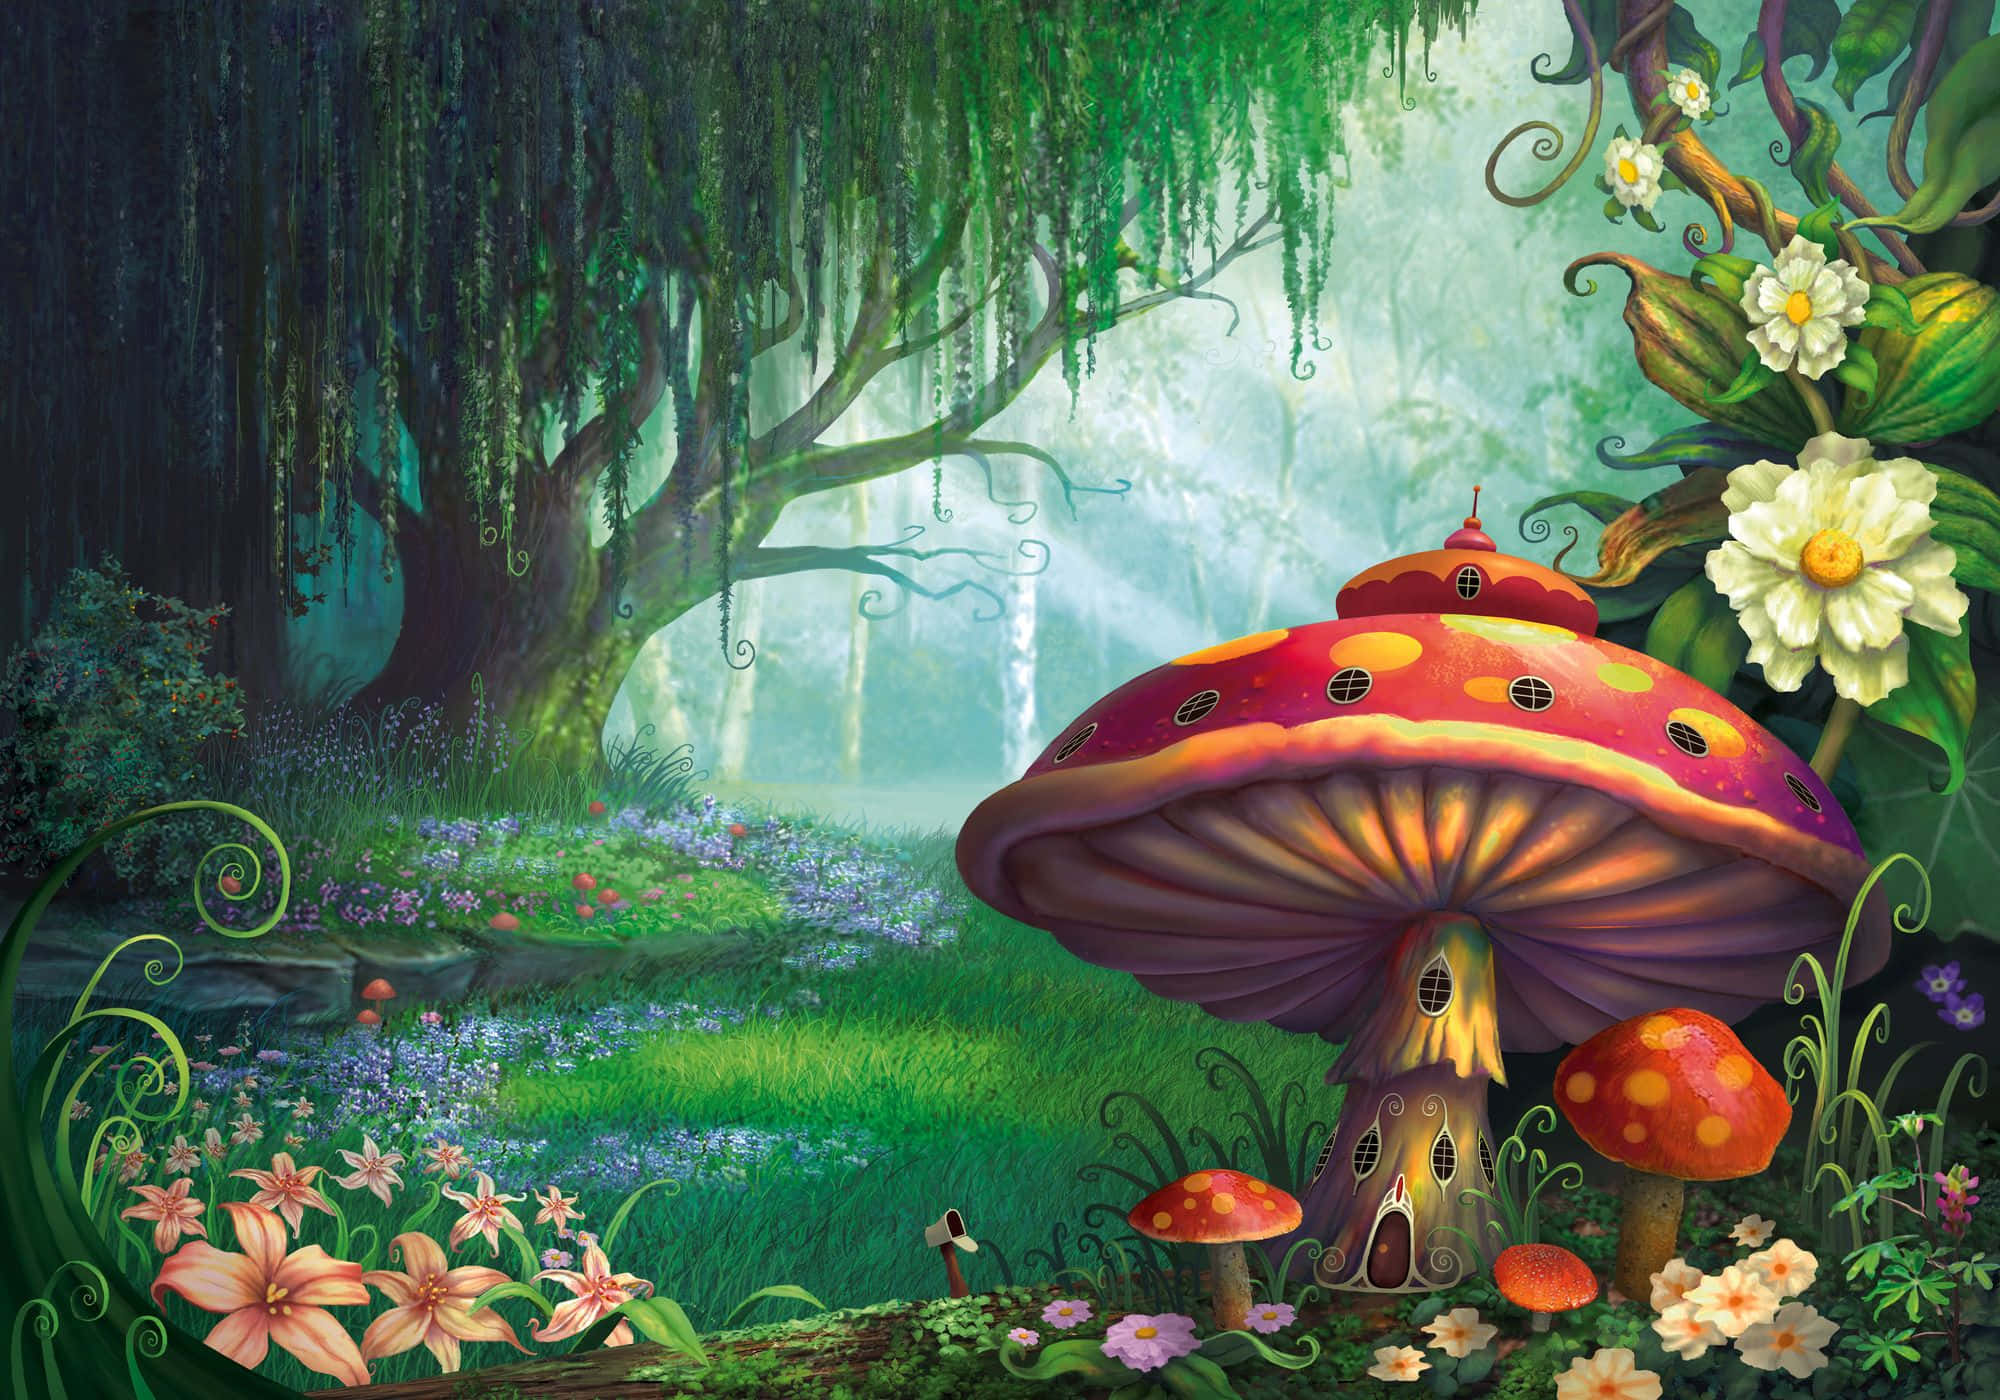 Explore the mysterious and enchanting Magical Forest